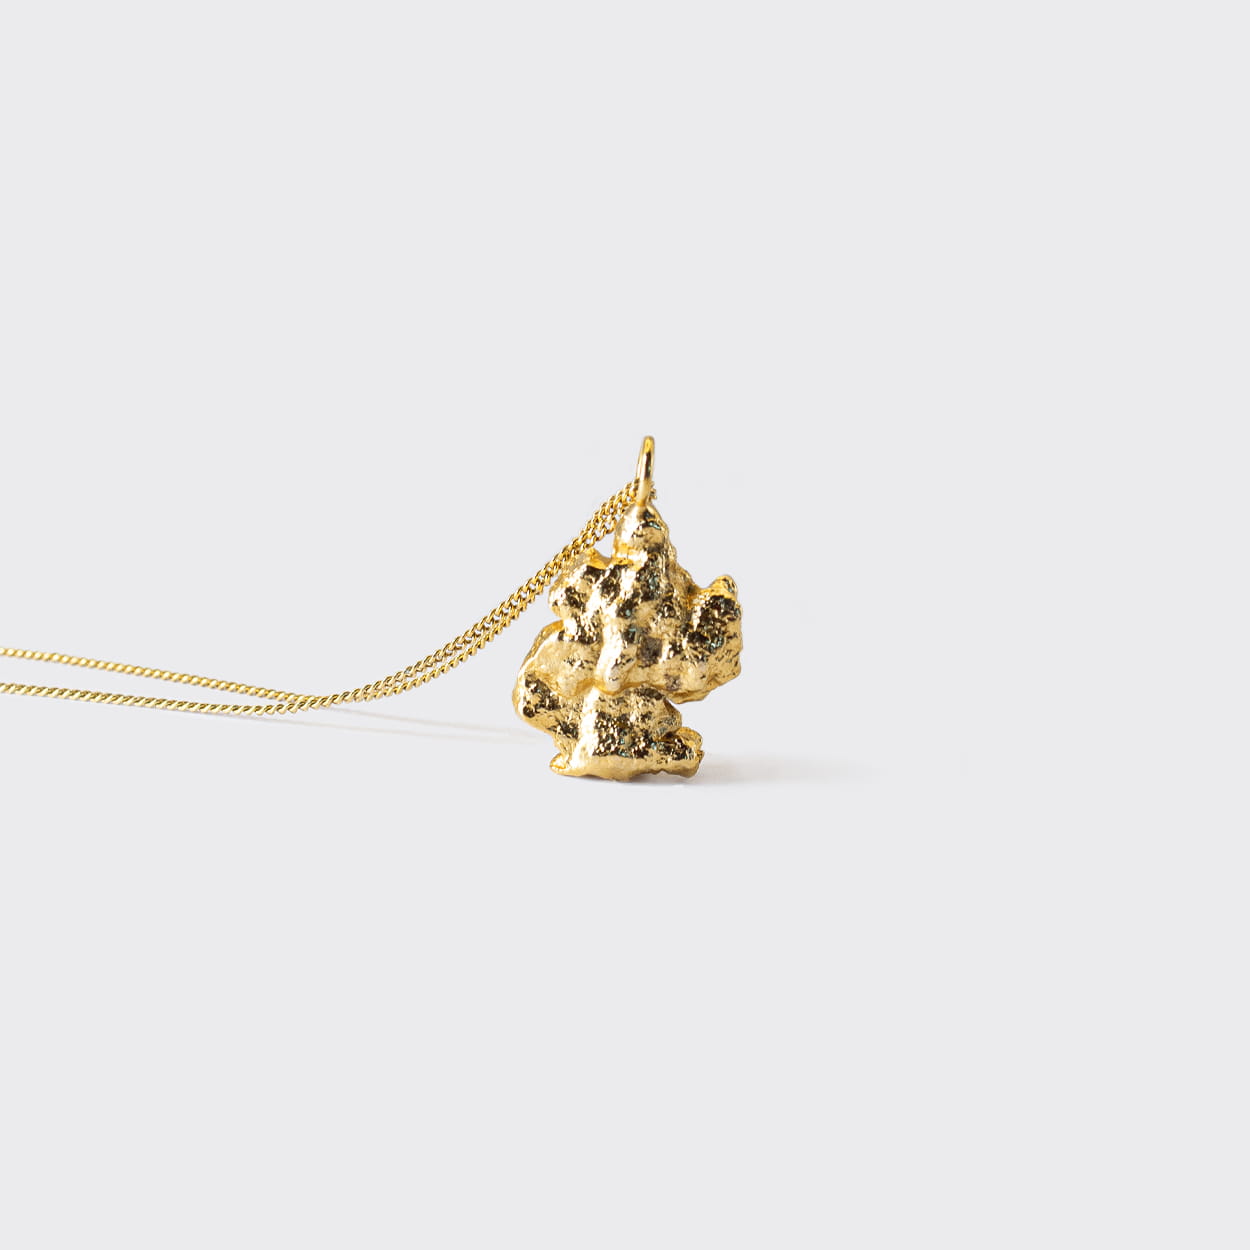 Atelier Domingo's Brooklyn necklace recalls a gold nugget. The pendant is made of a high-quality 24 karat gold plating. The cuban chain is made of 925 sterling silver with a high quality 18 karat gold plating. This necklace is unisex, made in Spain for both men and women.